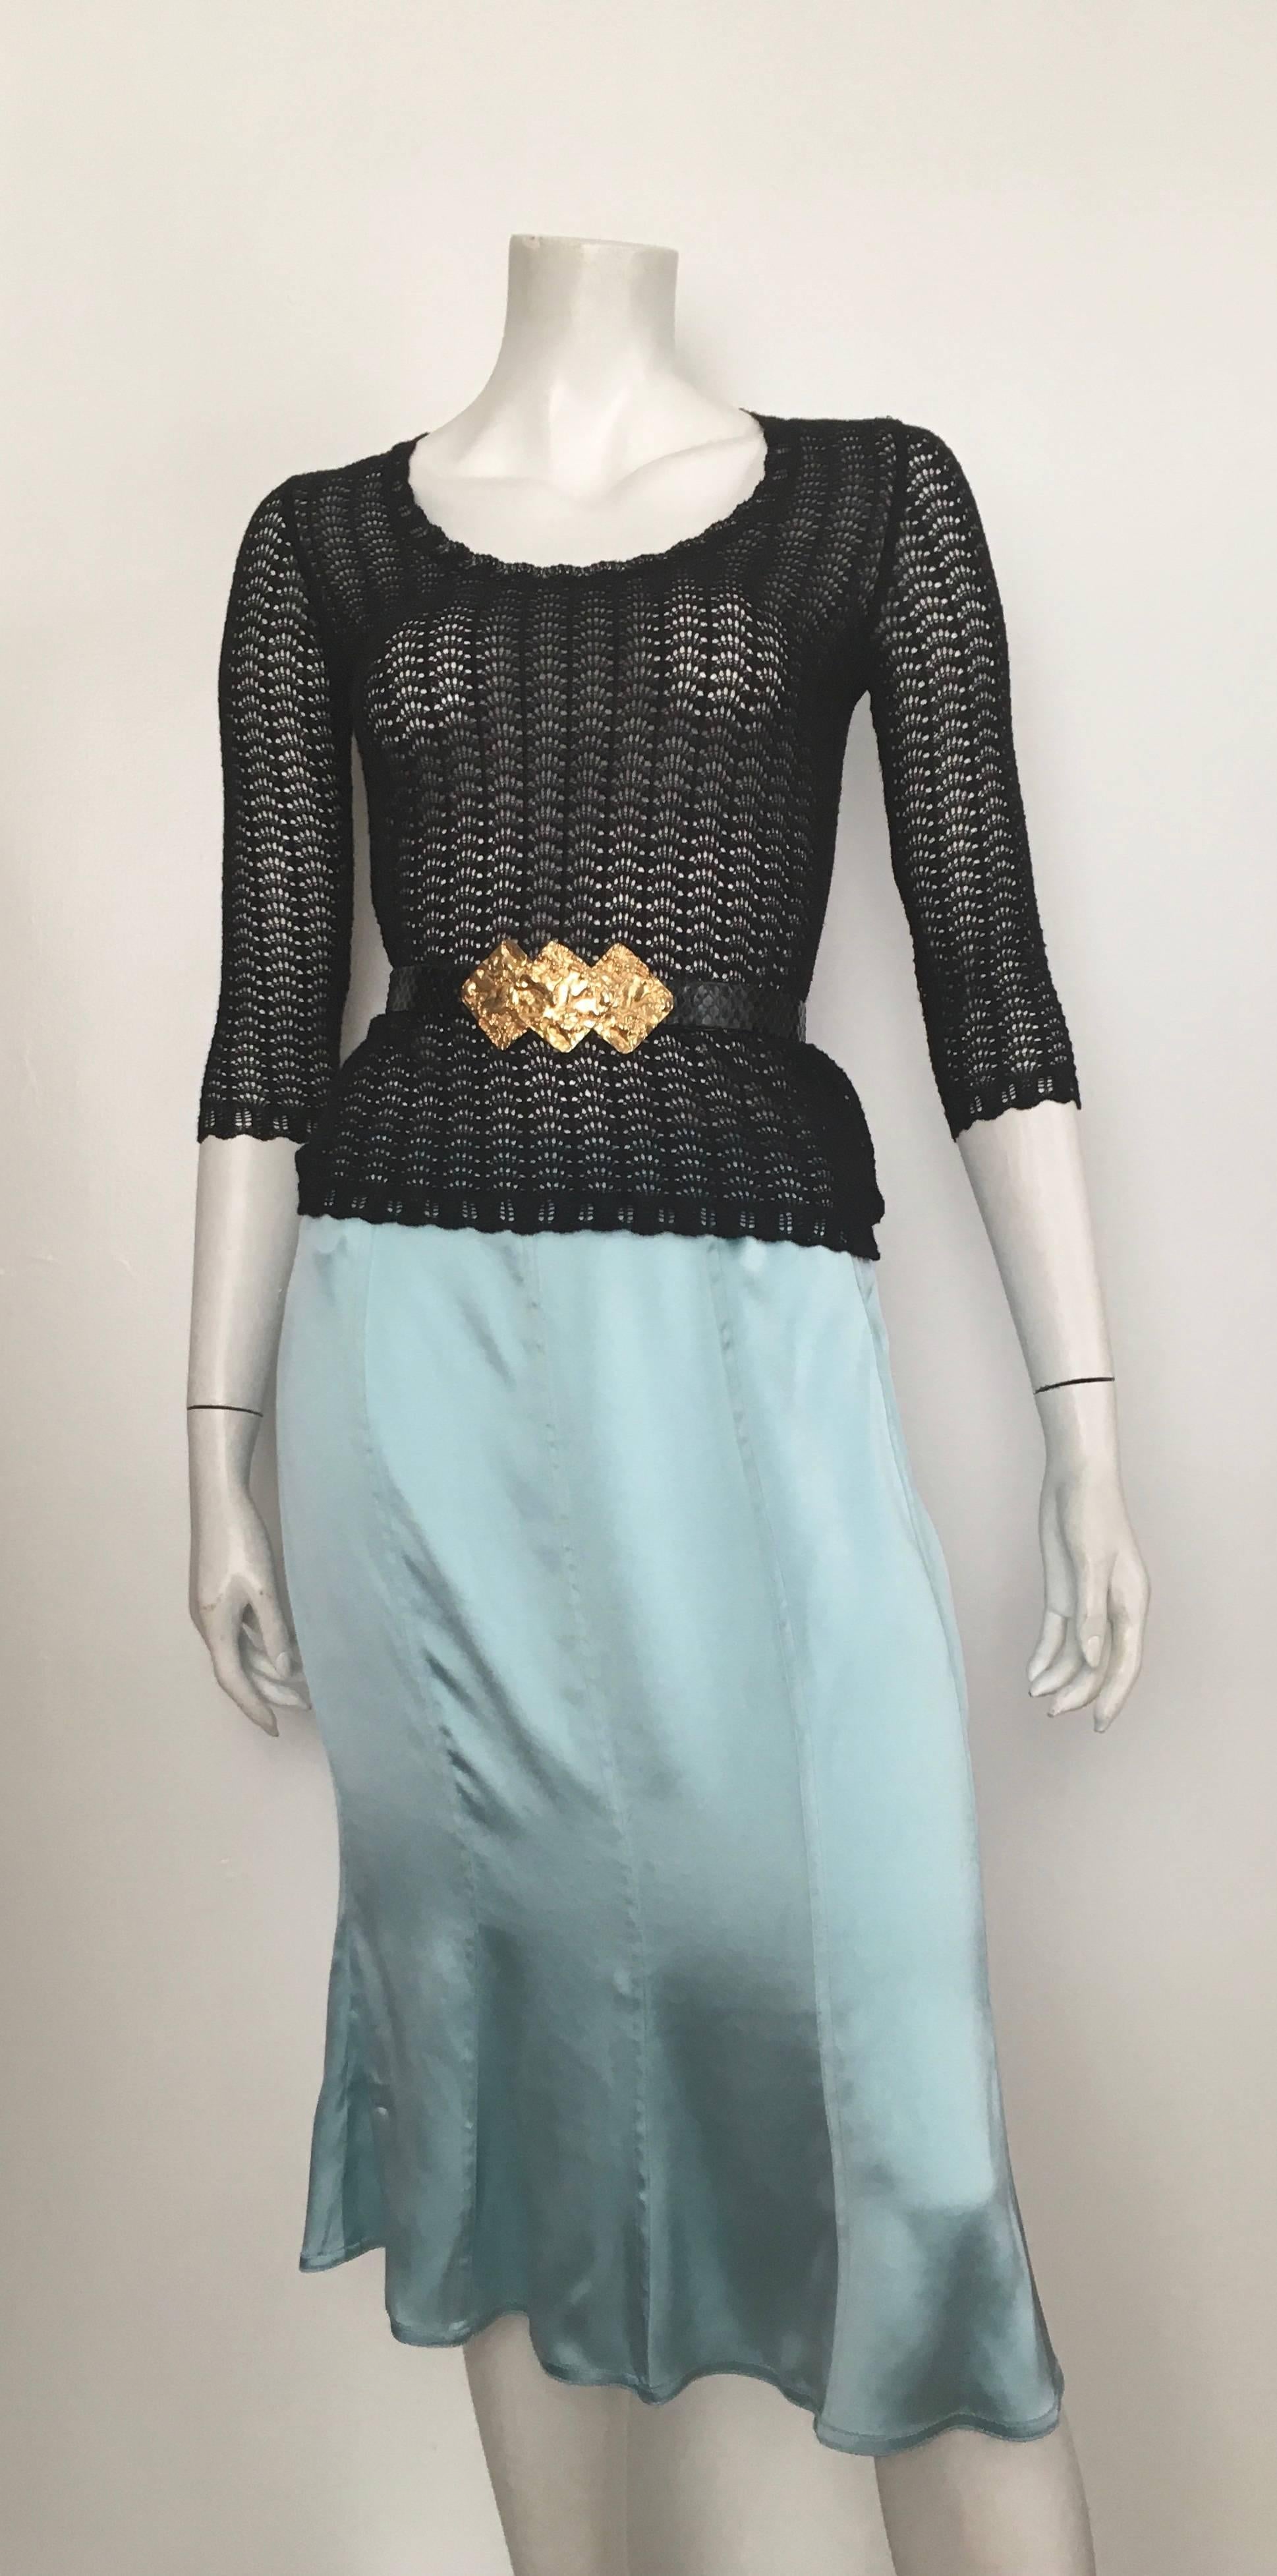 Yves Saint Laurent Rive Gauche by Tom Ford Fall 2003 aqua silk skirt is a French size 42 and fits an USA size 10.  Ladies please grab your trusted friend, Mr. Tape Measure, so you can properly measure your waist & hips to make certain this will fit